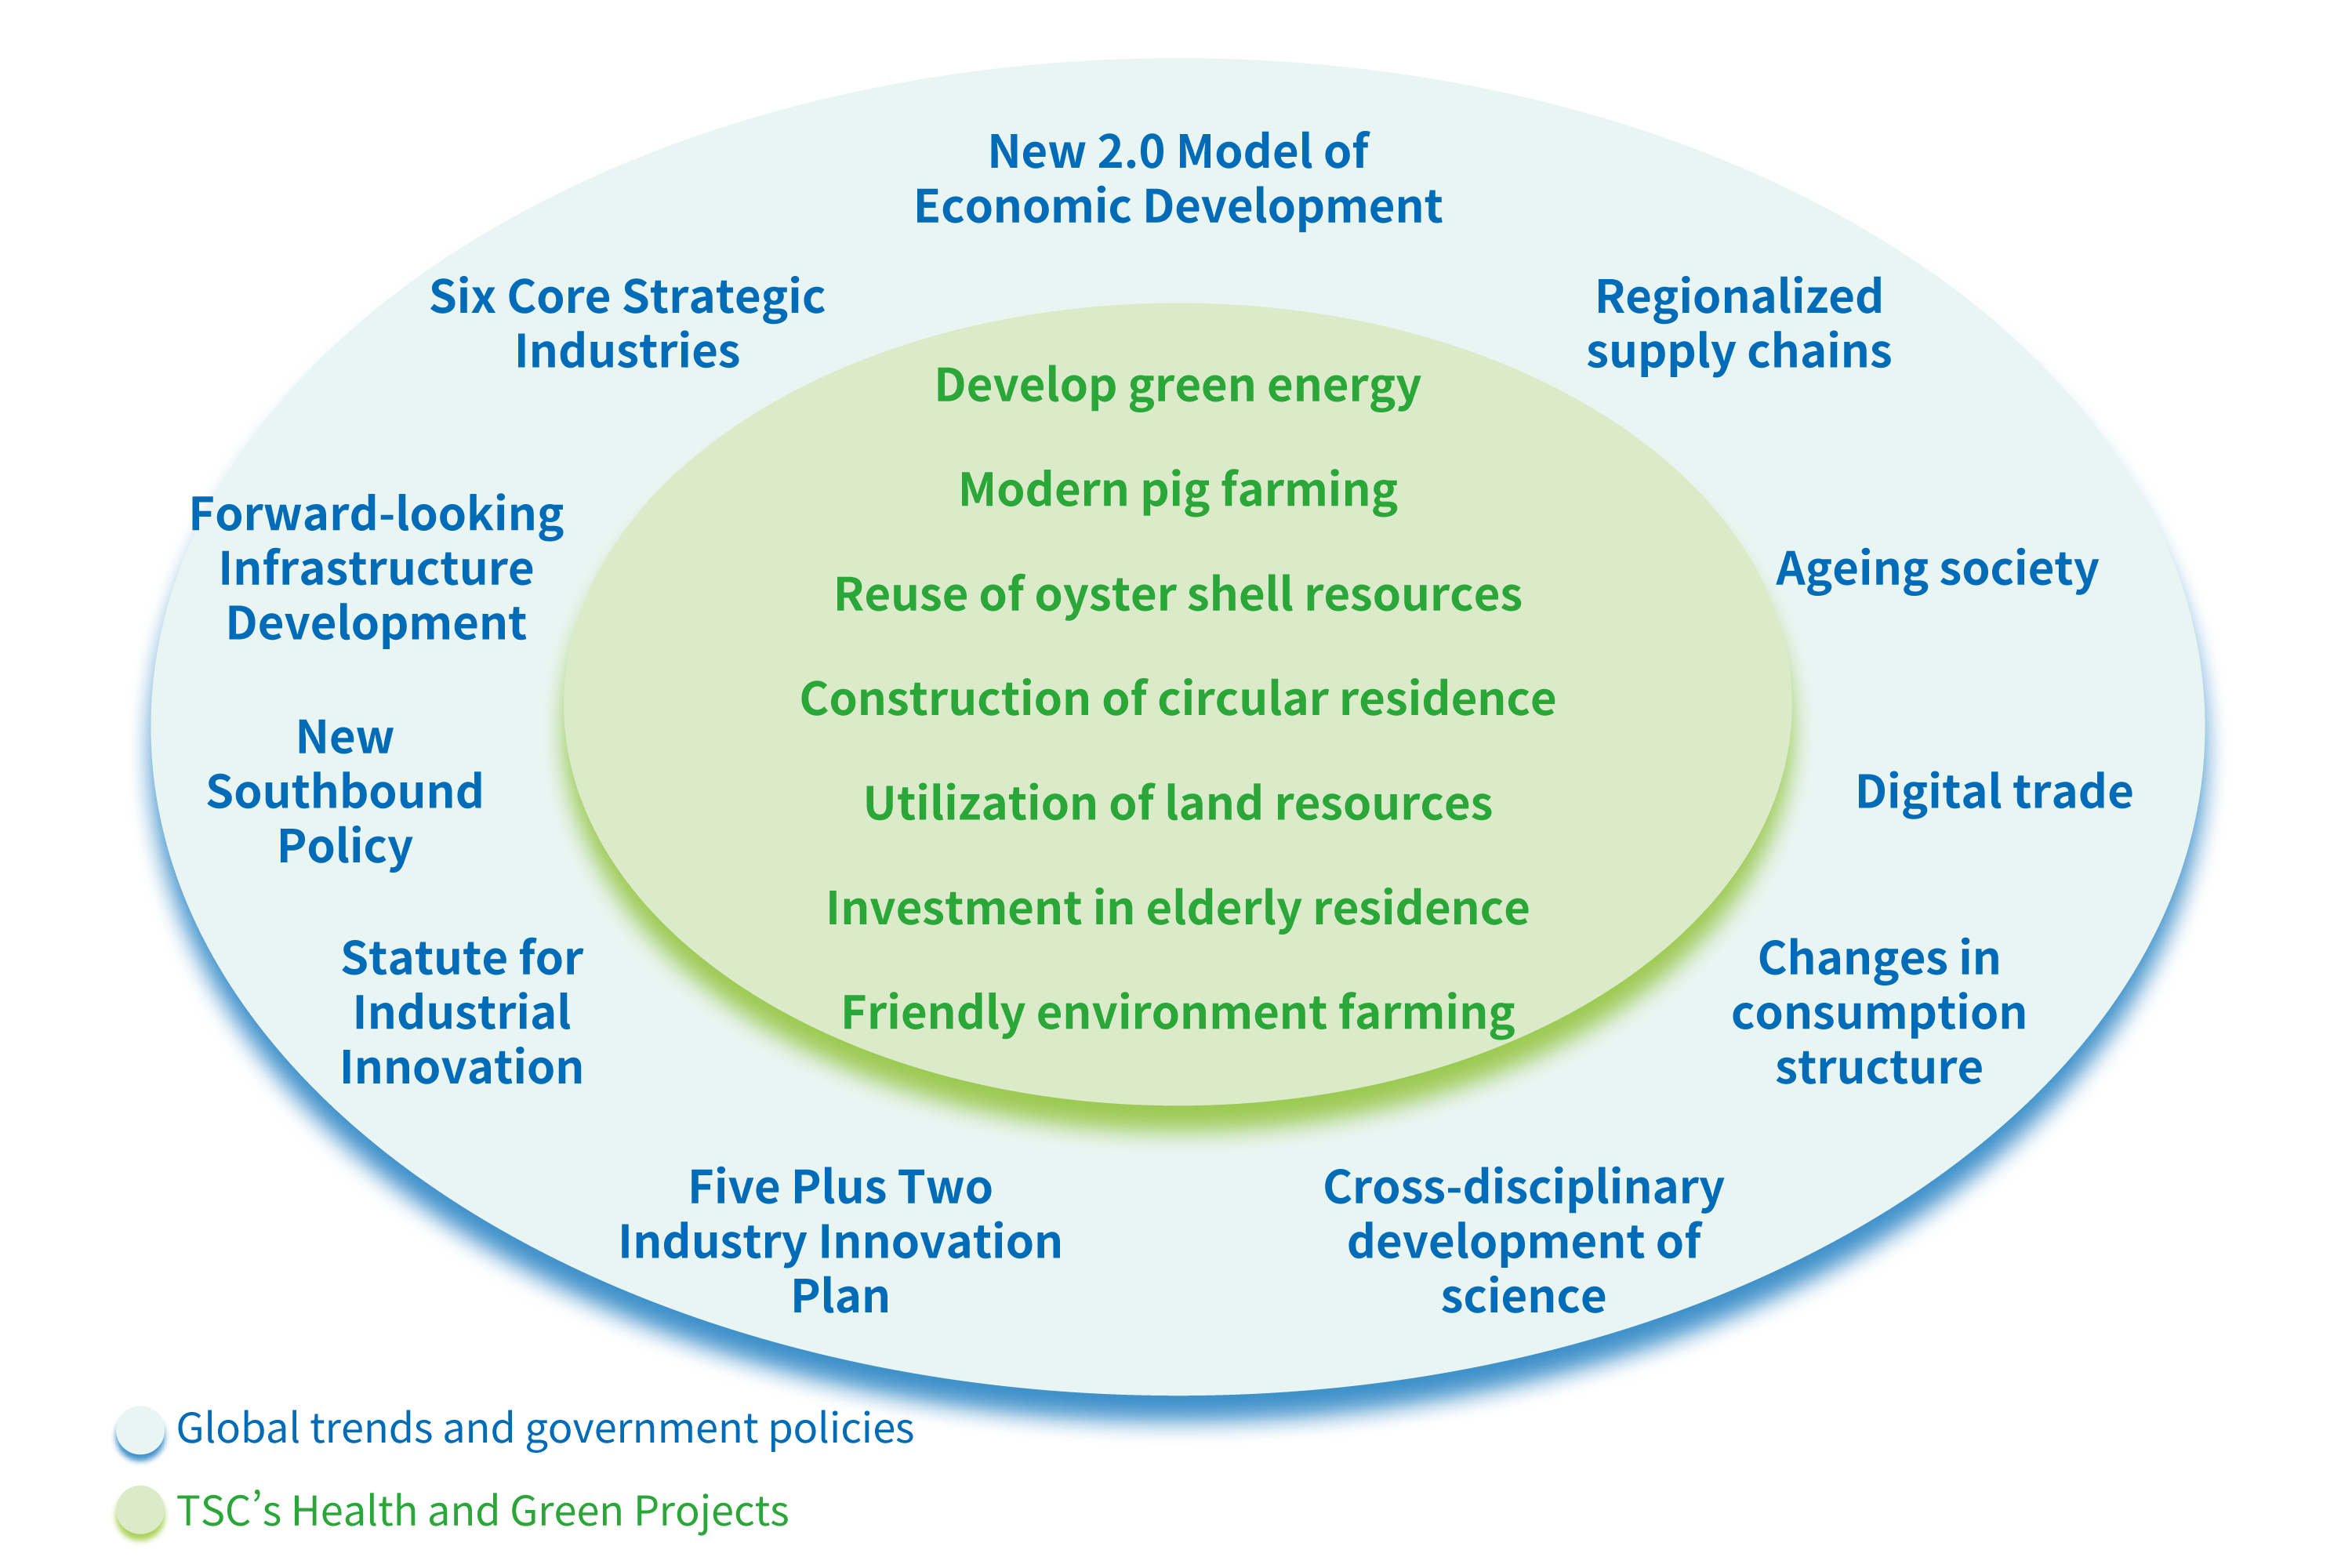 TSC’s Health and Green Projects, and global trends and government policies